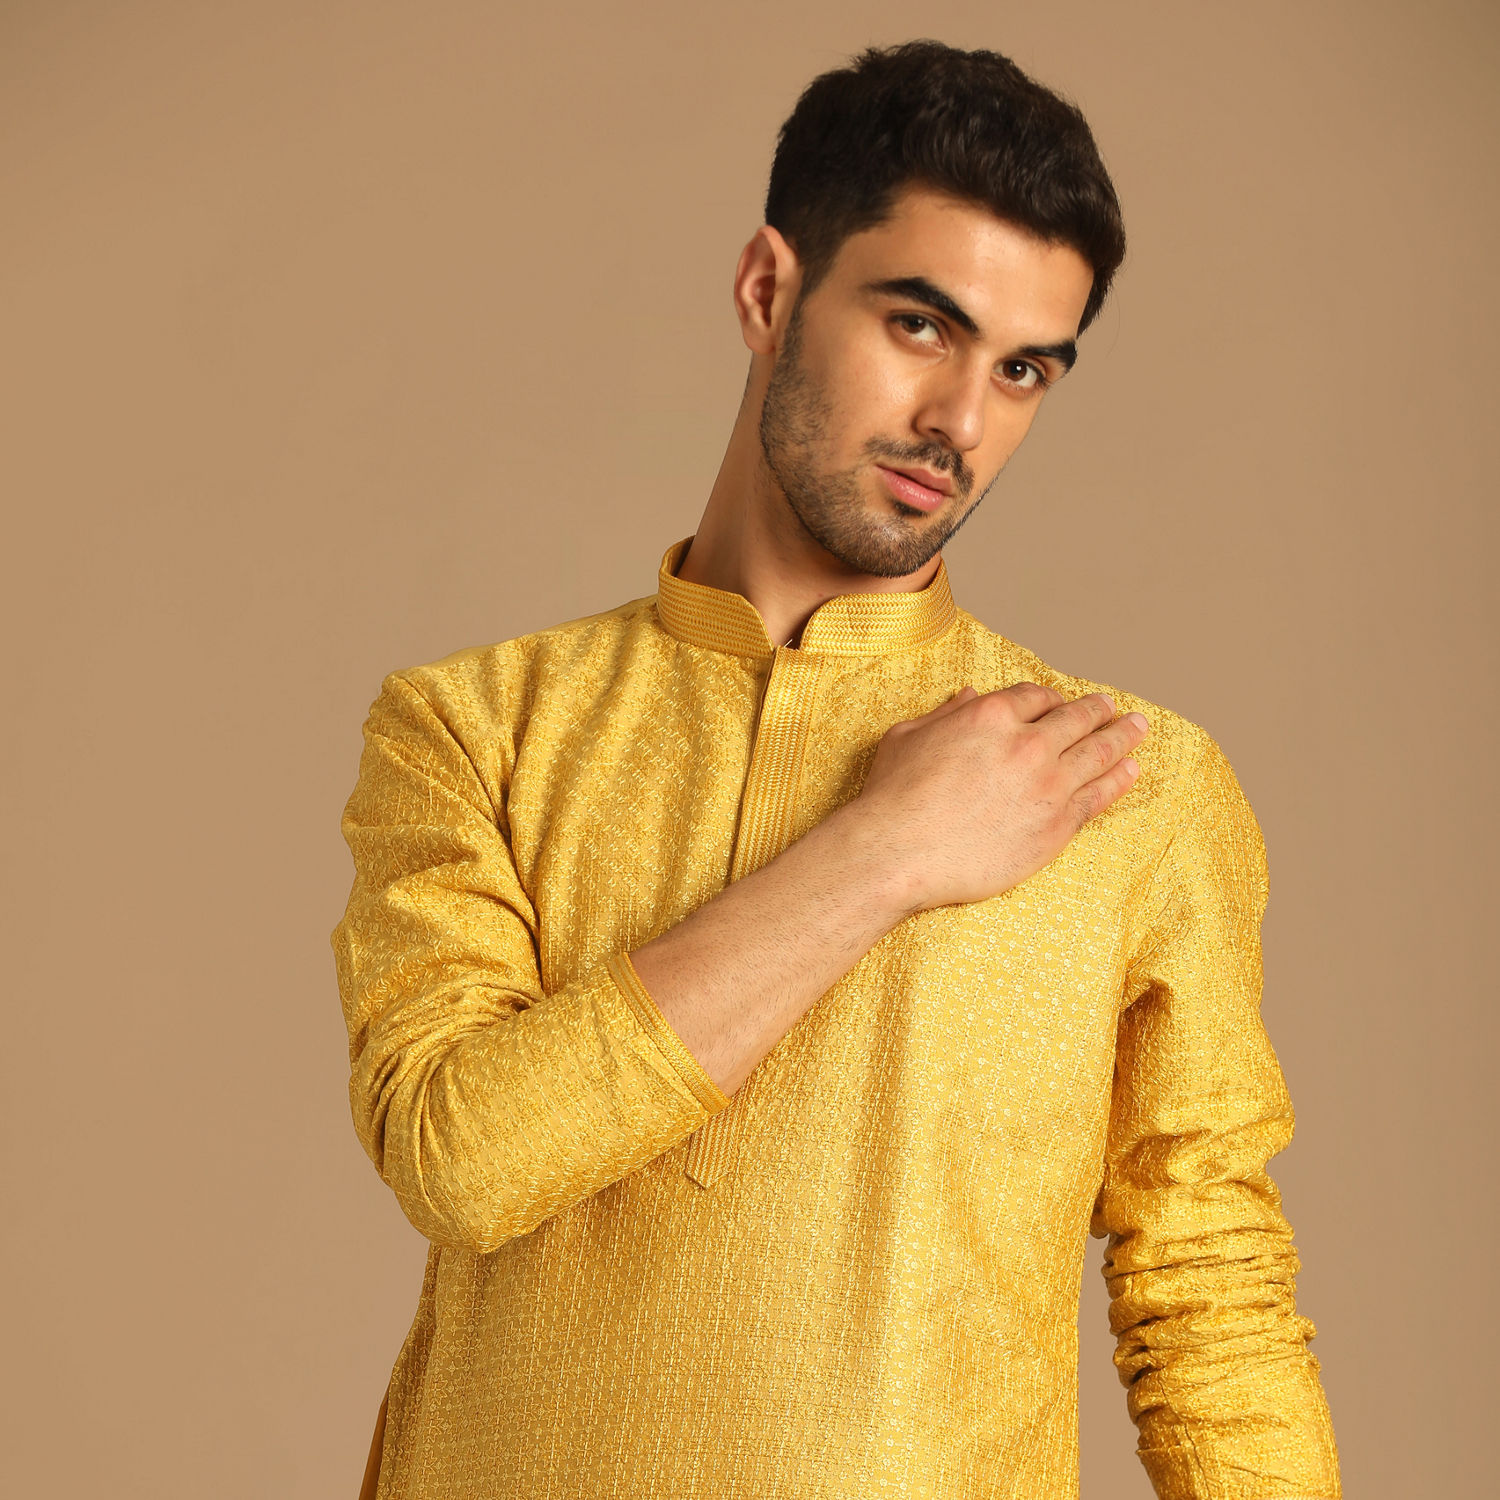 Grab The Attention With These Amazing Haldi Ceremony Outfits | Haldi  ceremony outfit, Haldi ceremony, Groom dress men